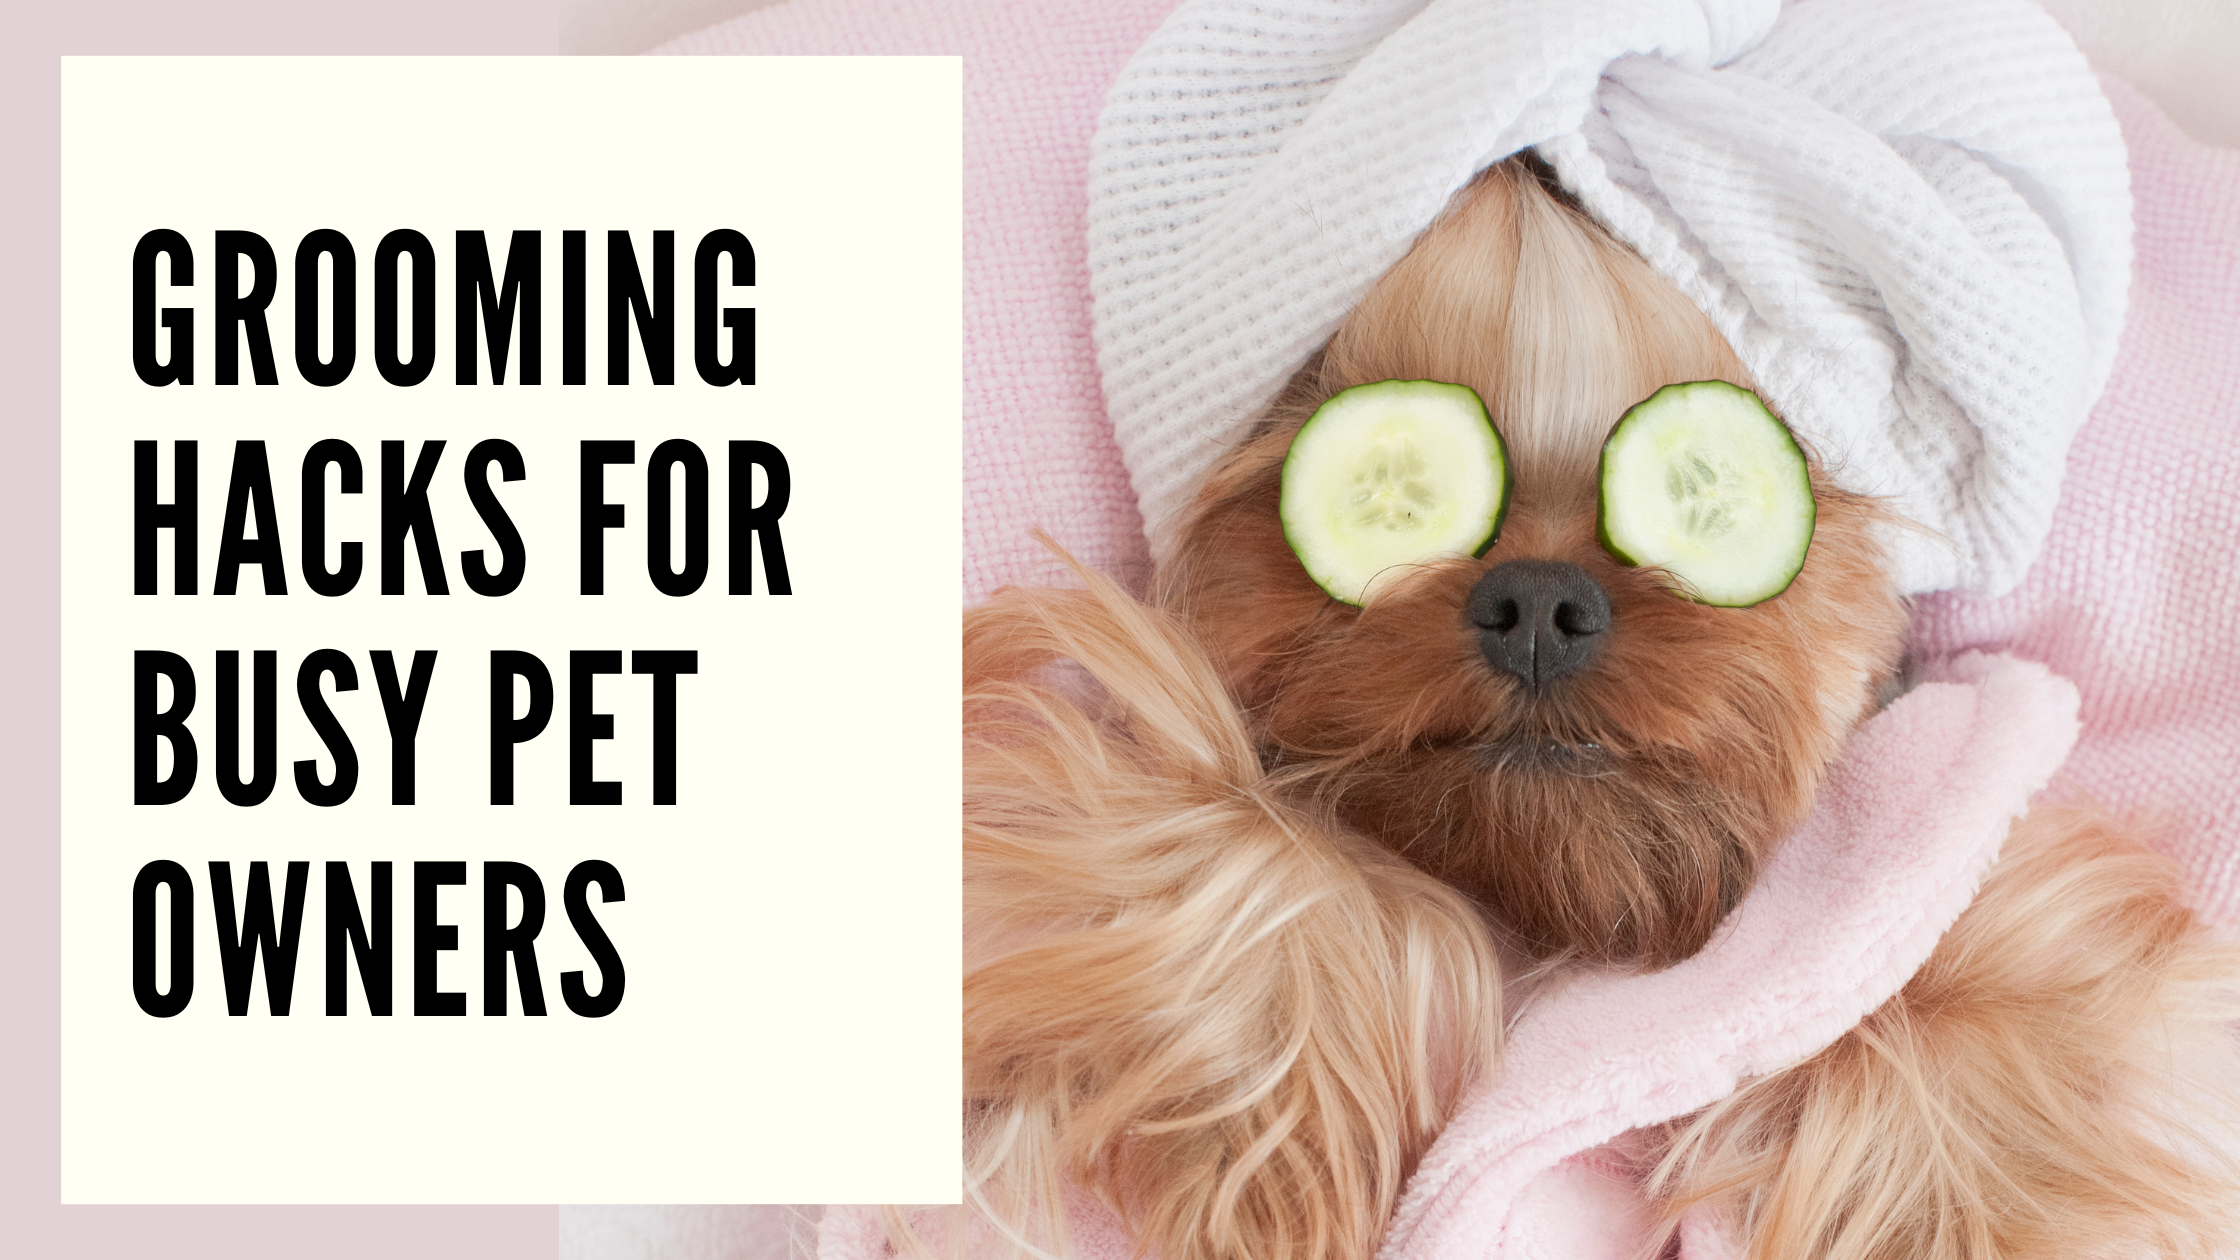 Grooming Hacks for Busy Pet Owners